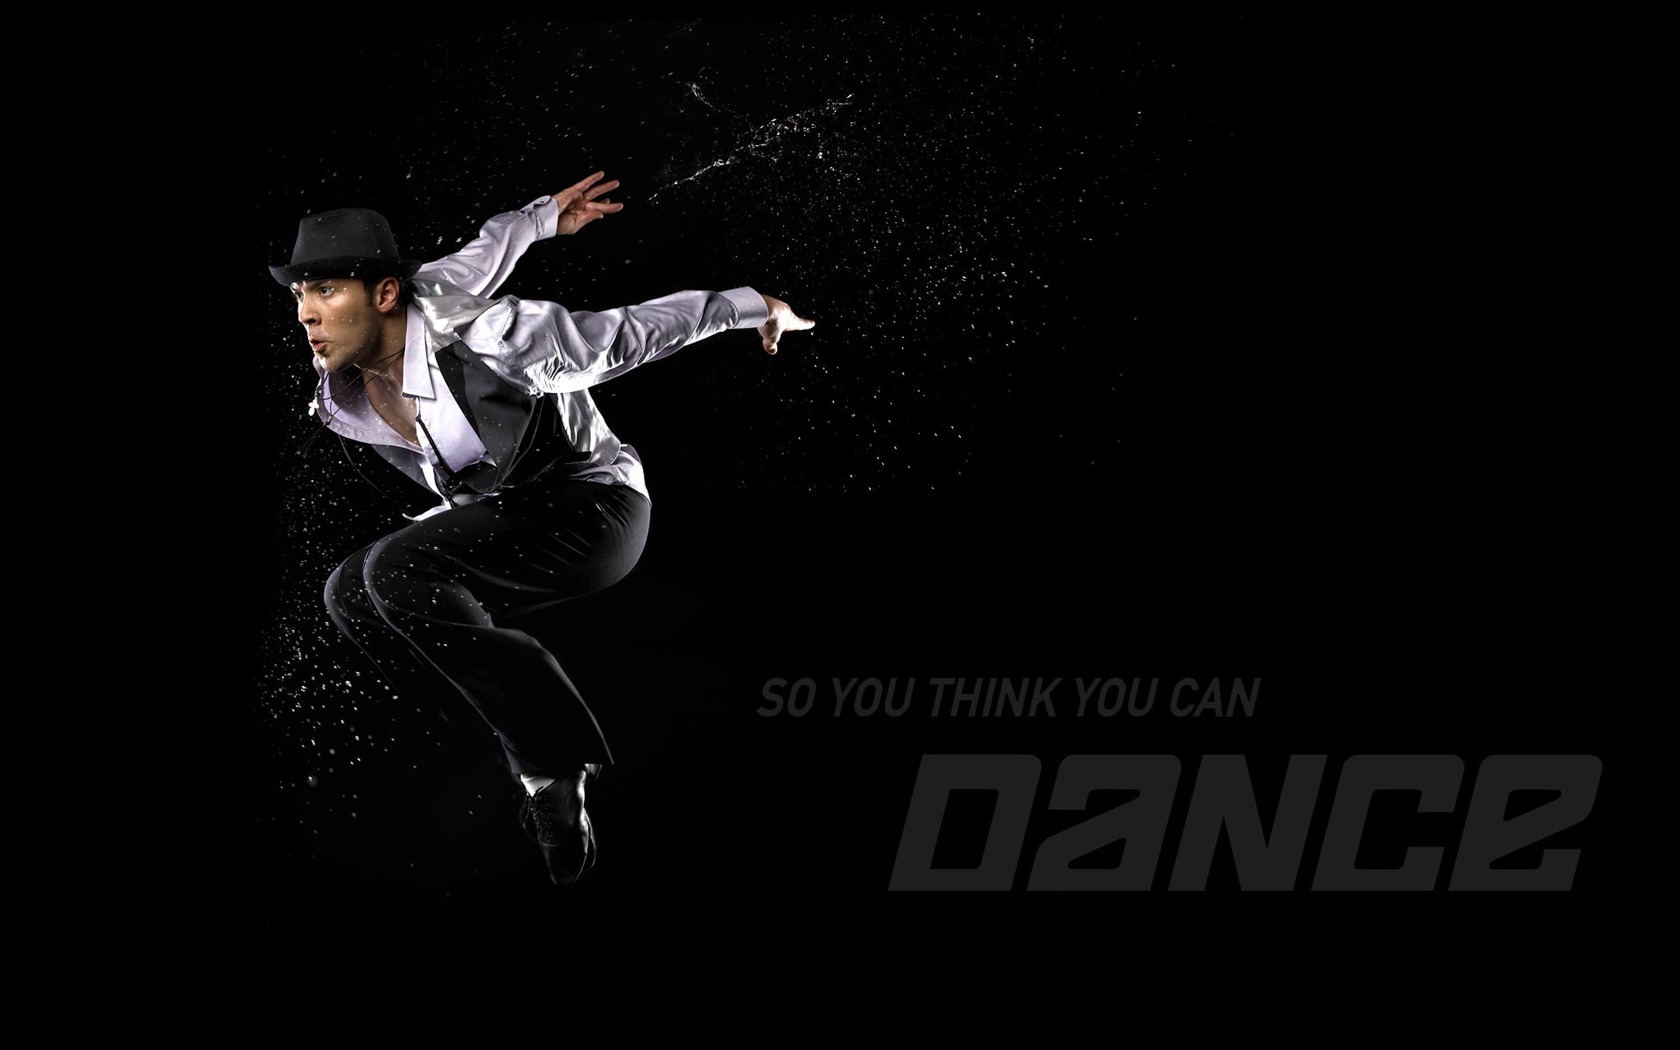 So You Think You Can Dance 舞林争霸 壁纸(一)12 - 1680x1050